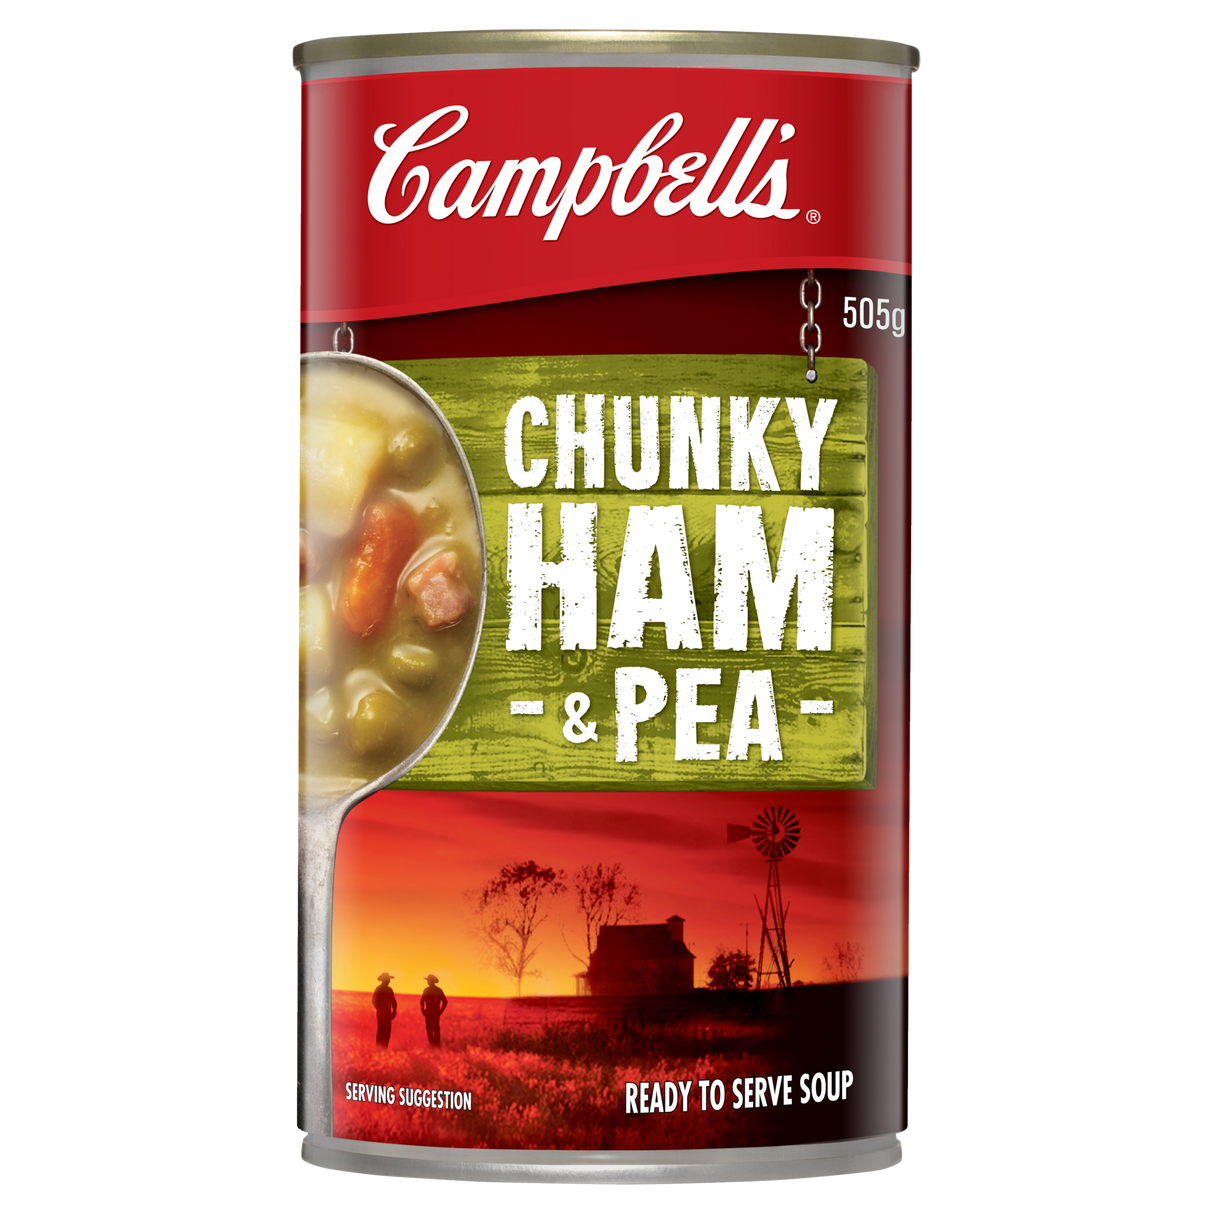 Campbell's Chunky Soup Ham & Pea 505g